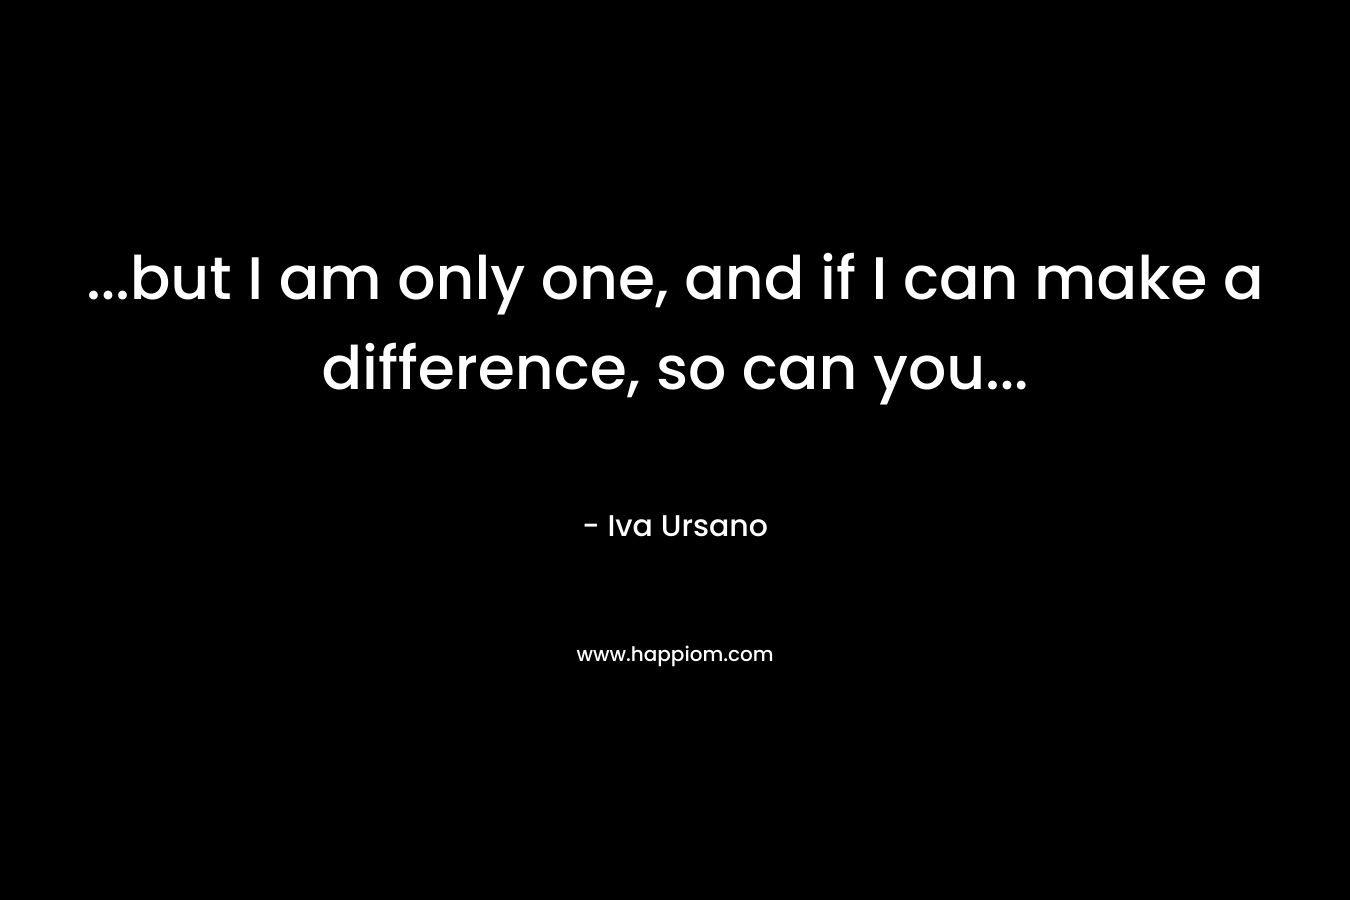 ...but I am only one, and if I can make a difference, so can you...